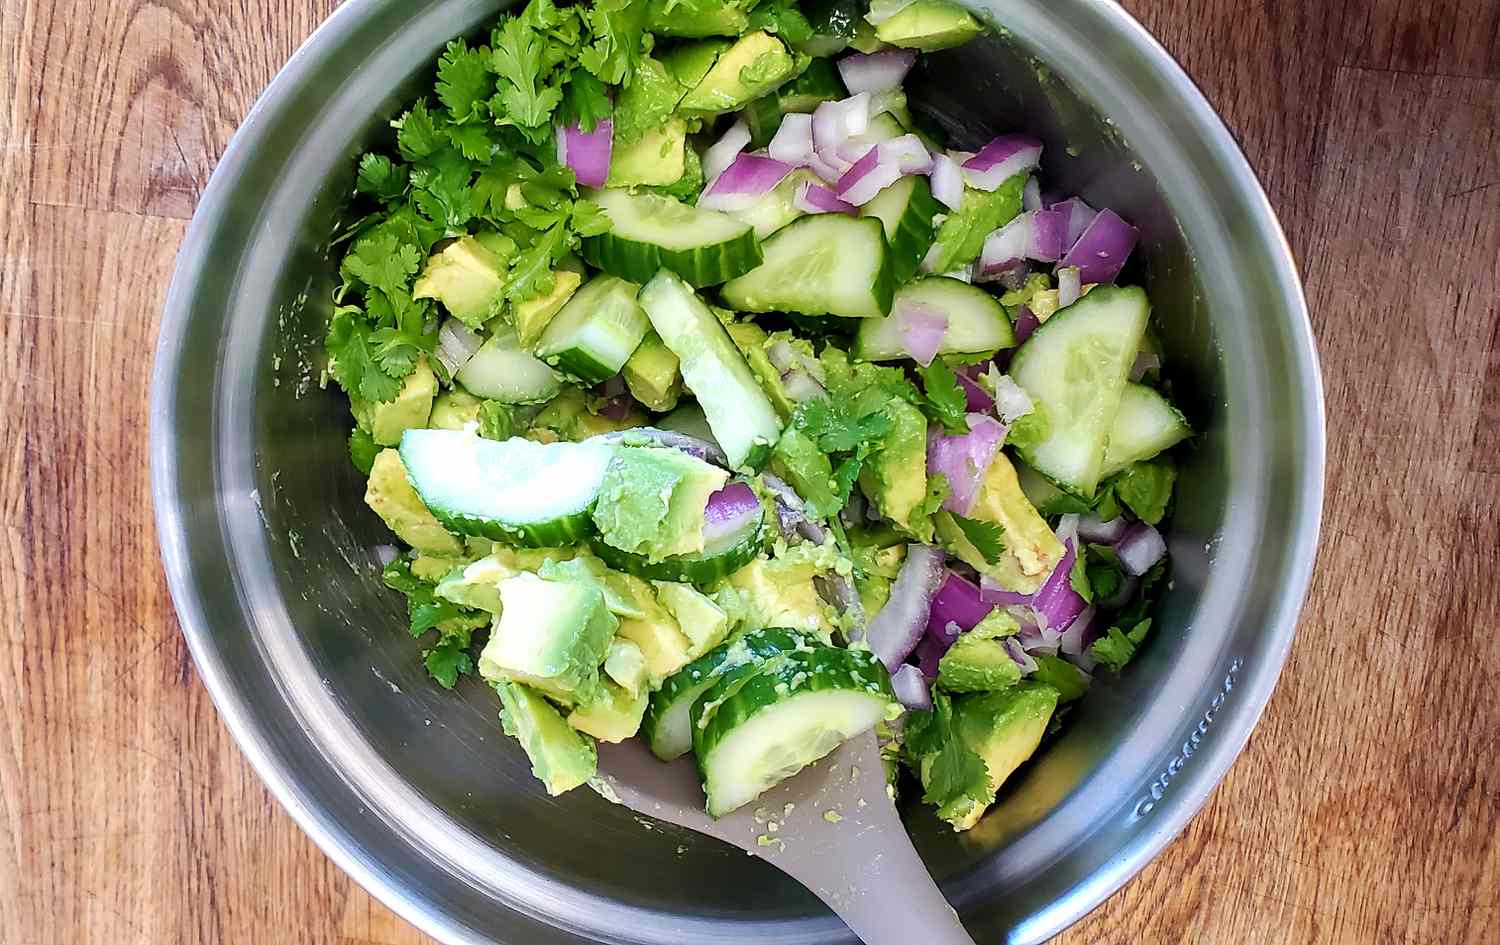 Avocado and vegetables in a bowl for tuna salad